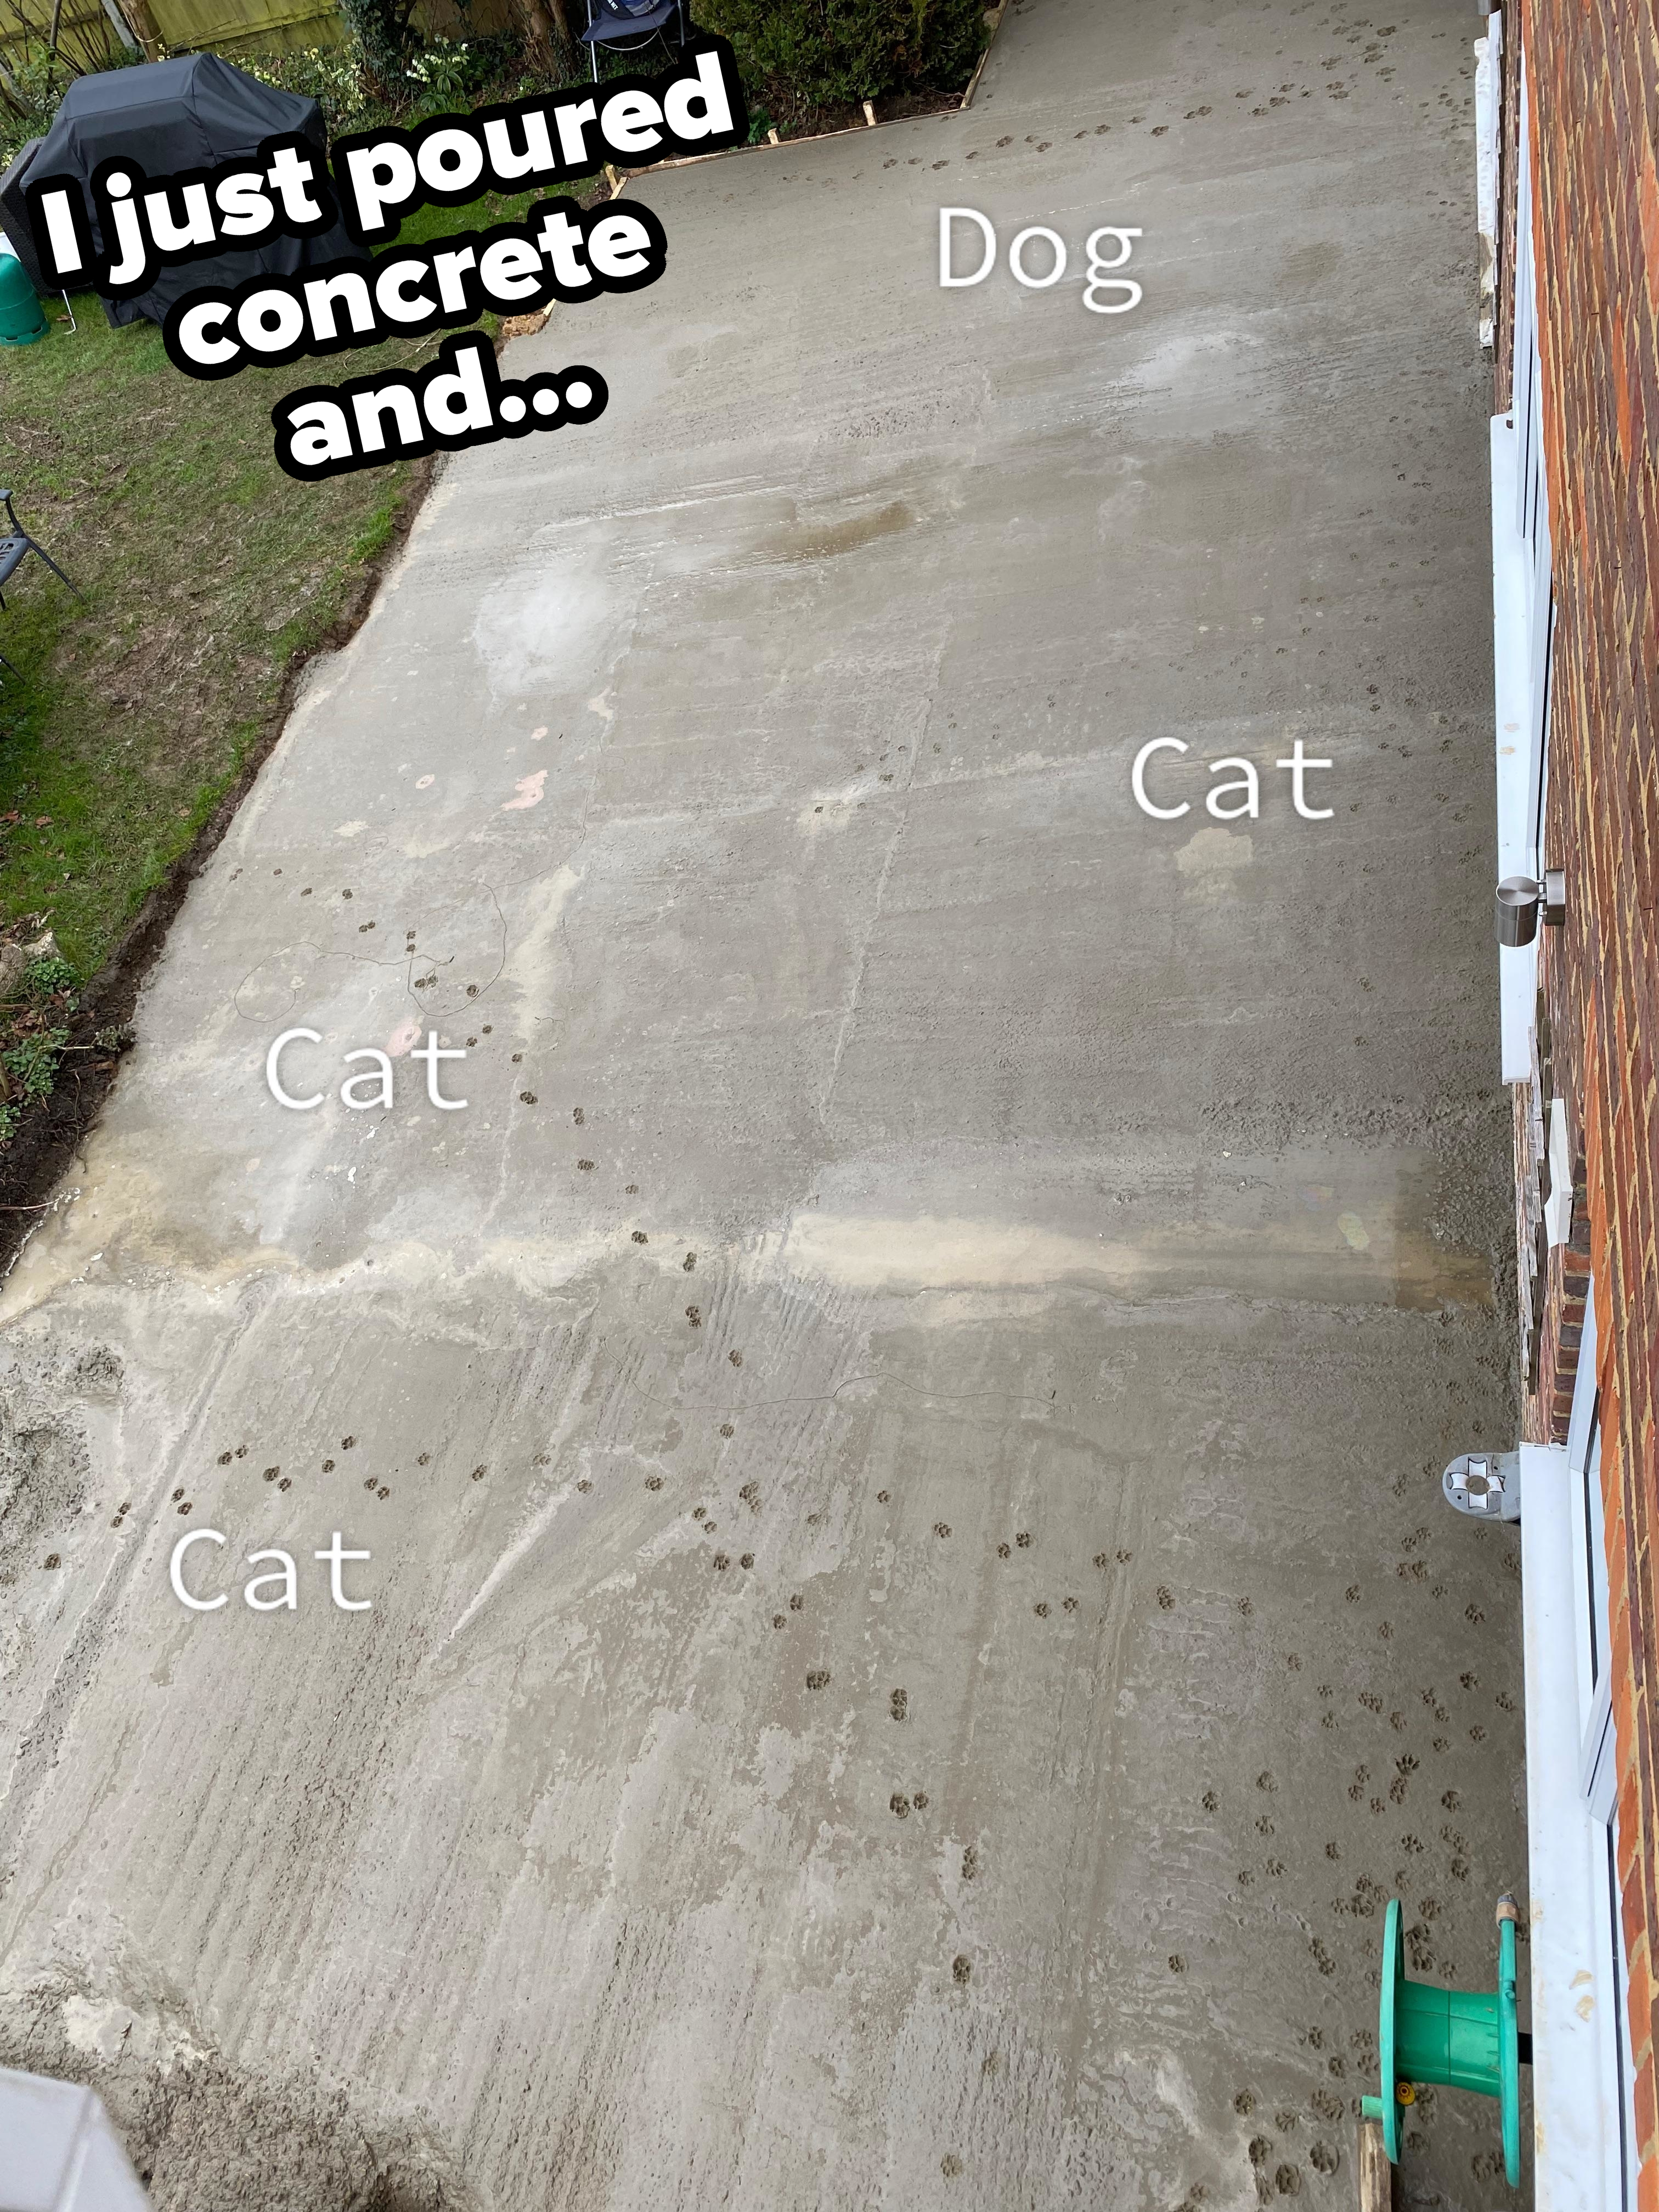 Fresh concrete sidewalk with paw prints; labeled &quot;Dog&quot; near large prints and &quot;Cat&quot; by smaller prints